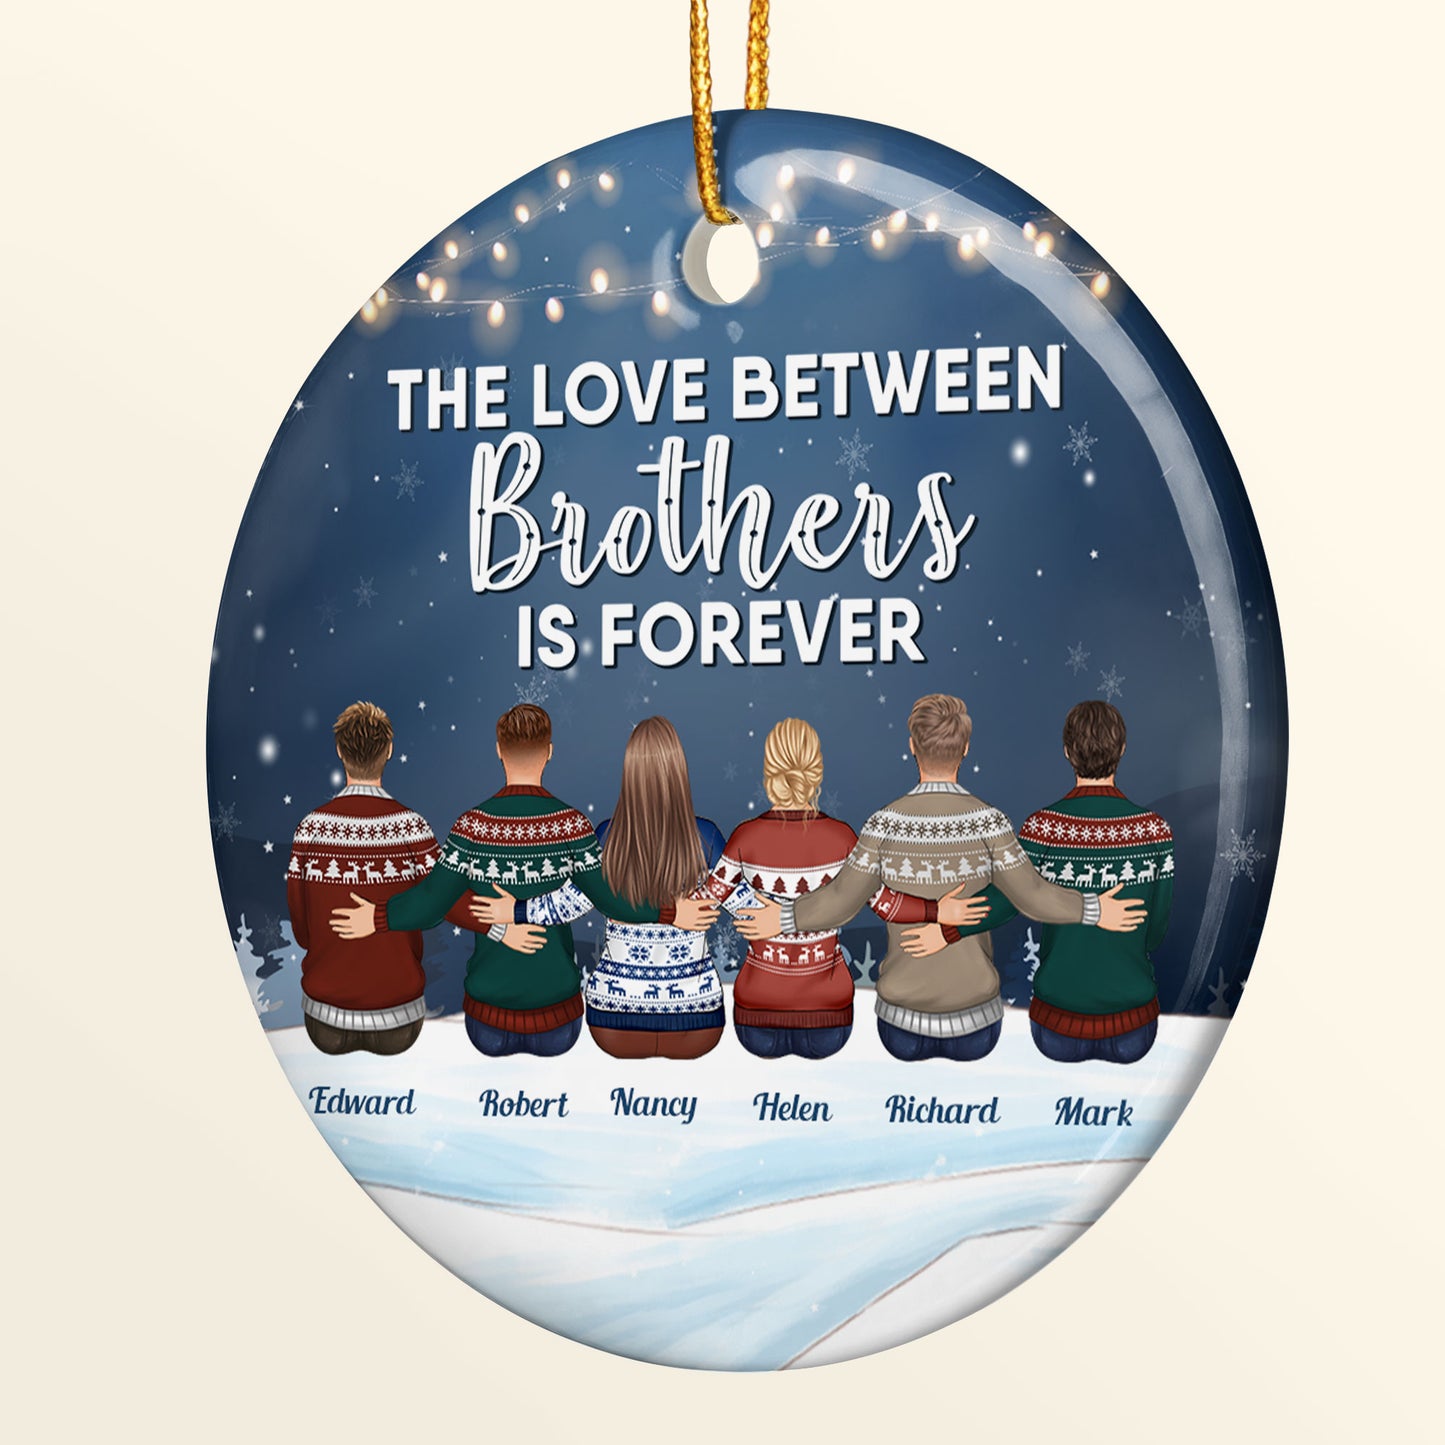 The Love Between Brothers & Sisters Is Forever - Personalized Ceramic Ornament - Family Hugging